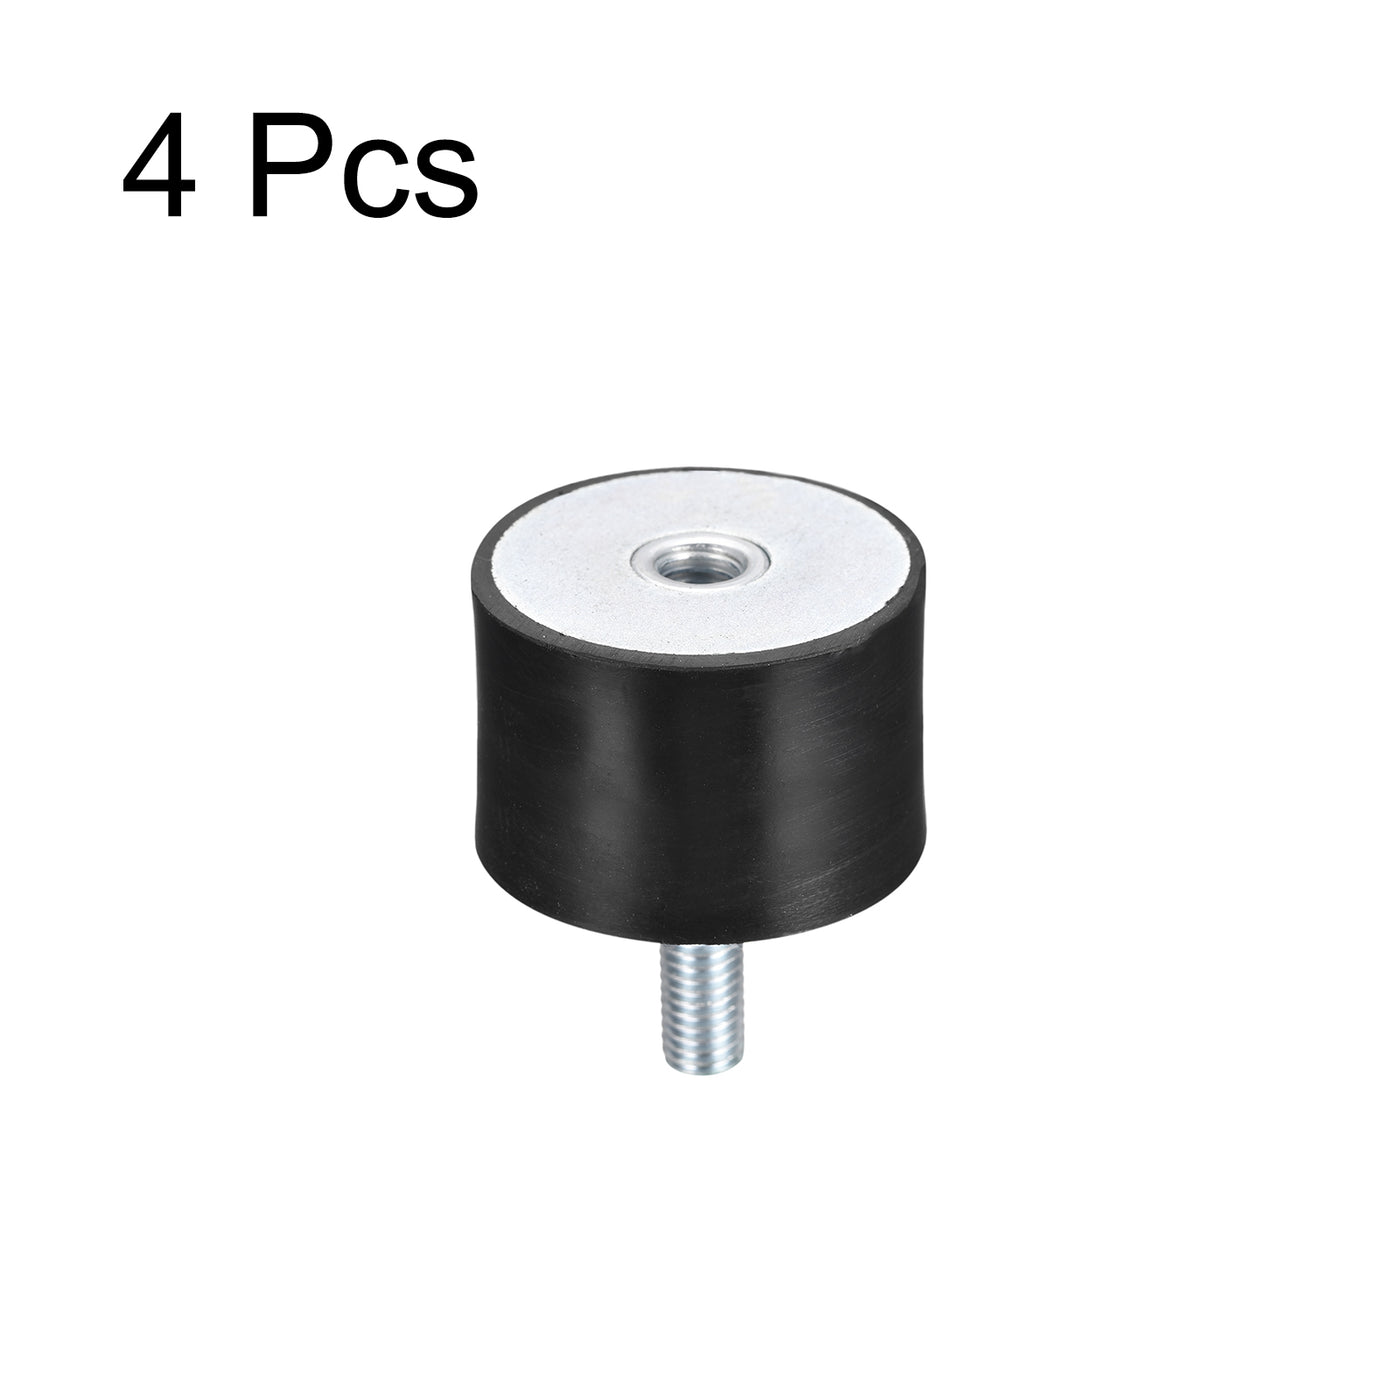 uxcell Uxcell Rubber Mount 4pcs M8 Male/Female Vibration Isolator Shock Absorber, D40mmxH30mm